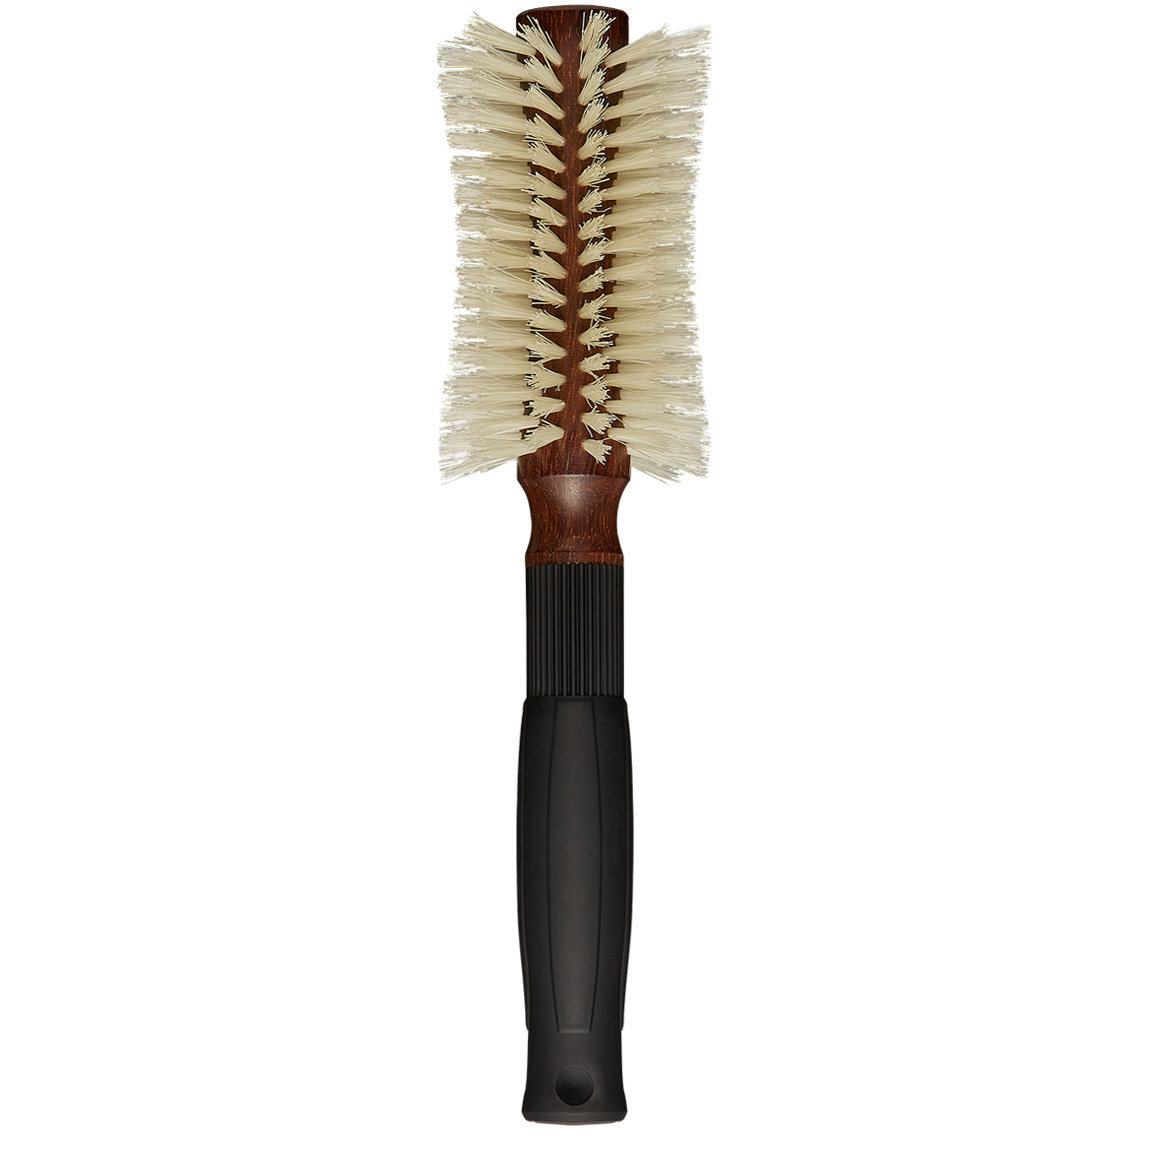 Christophe Robin Pre-Curved Blowdry Hairbrush 12 Rows alternative view 1 - product swatch.